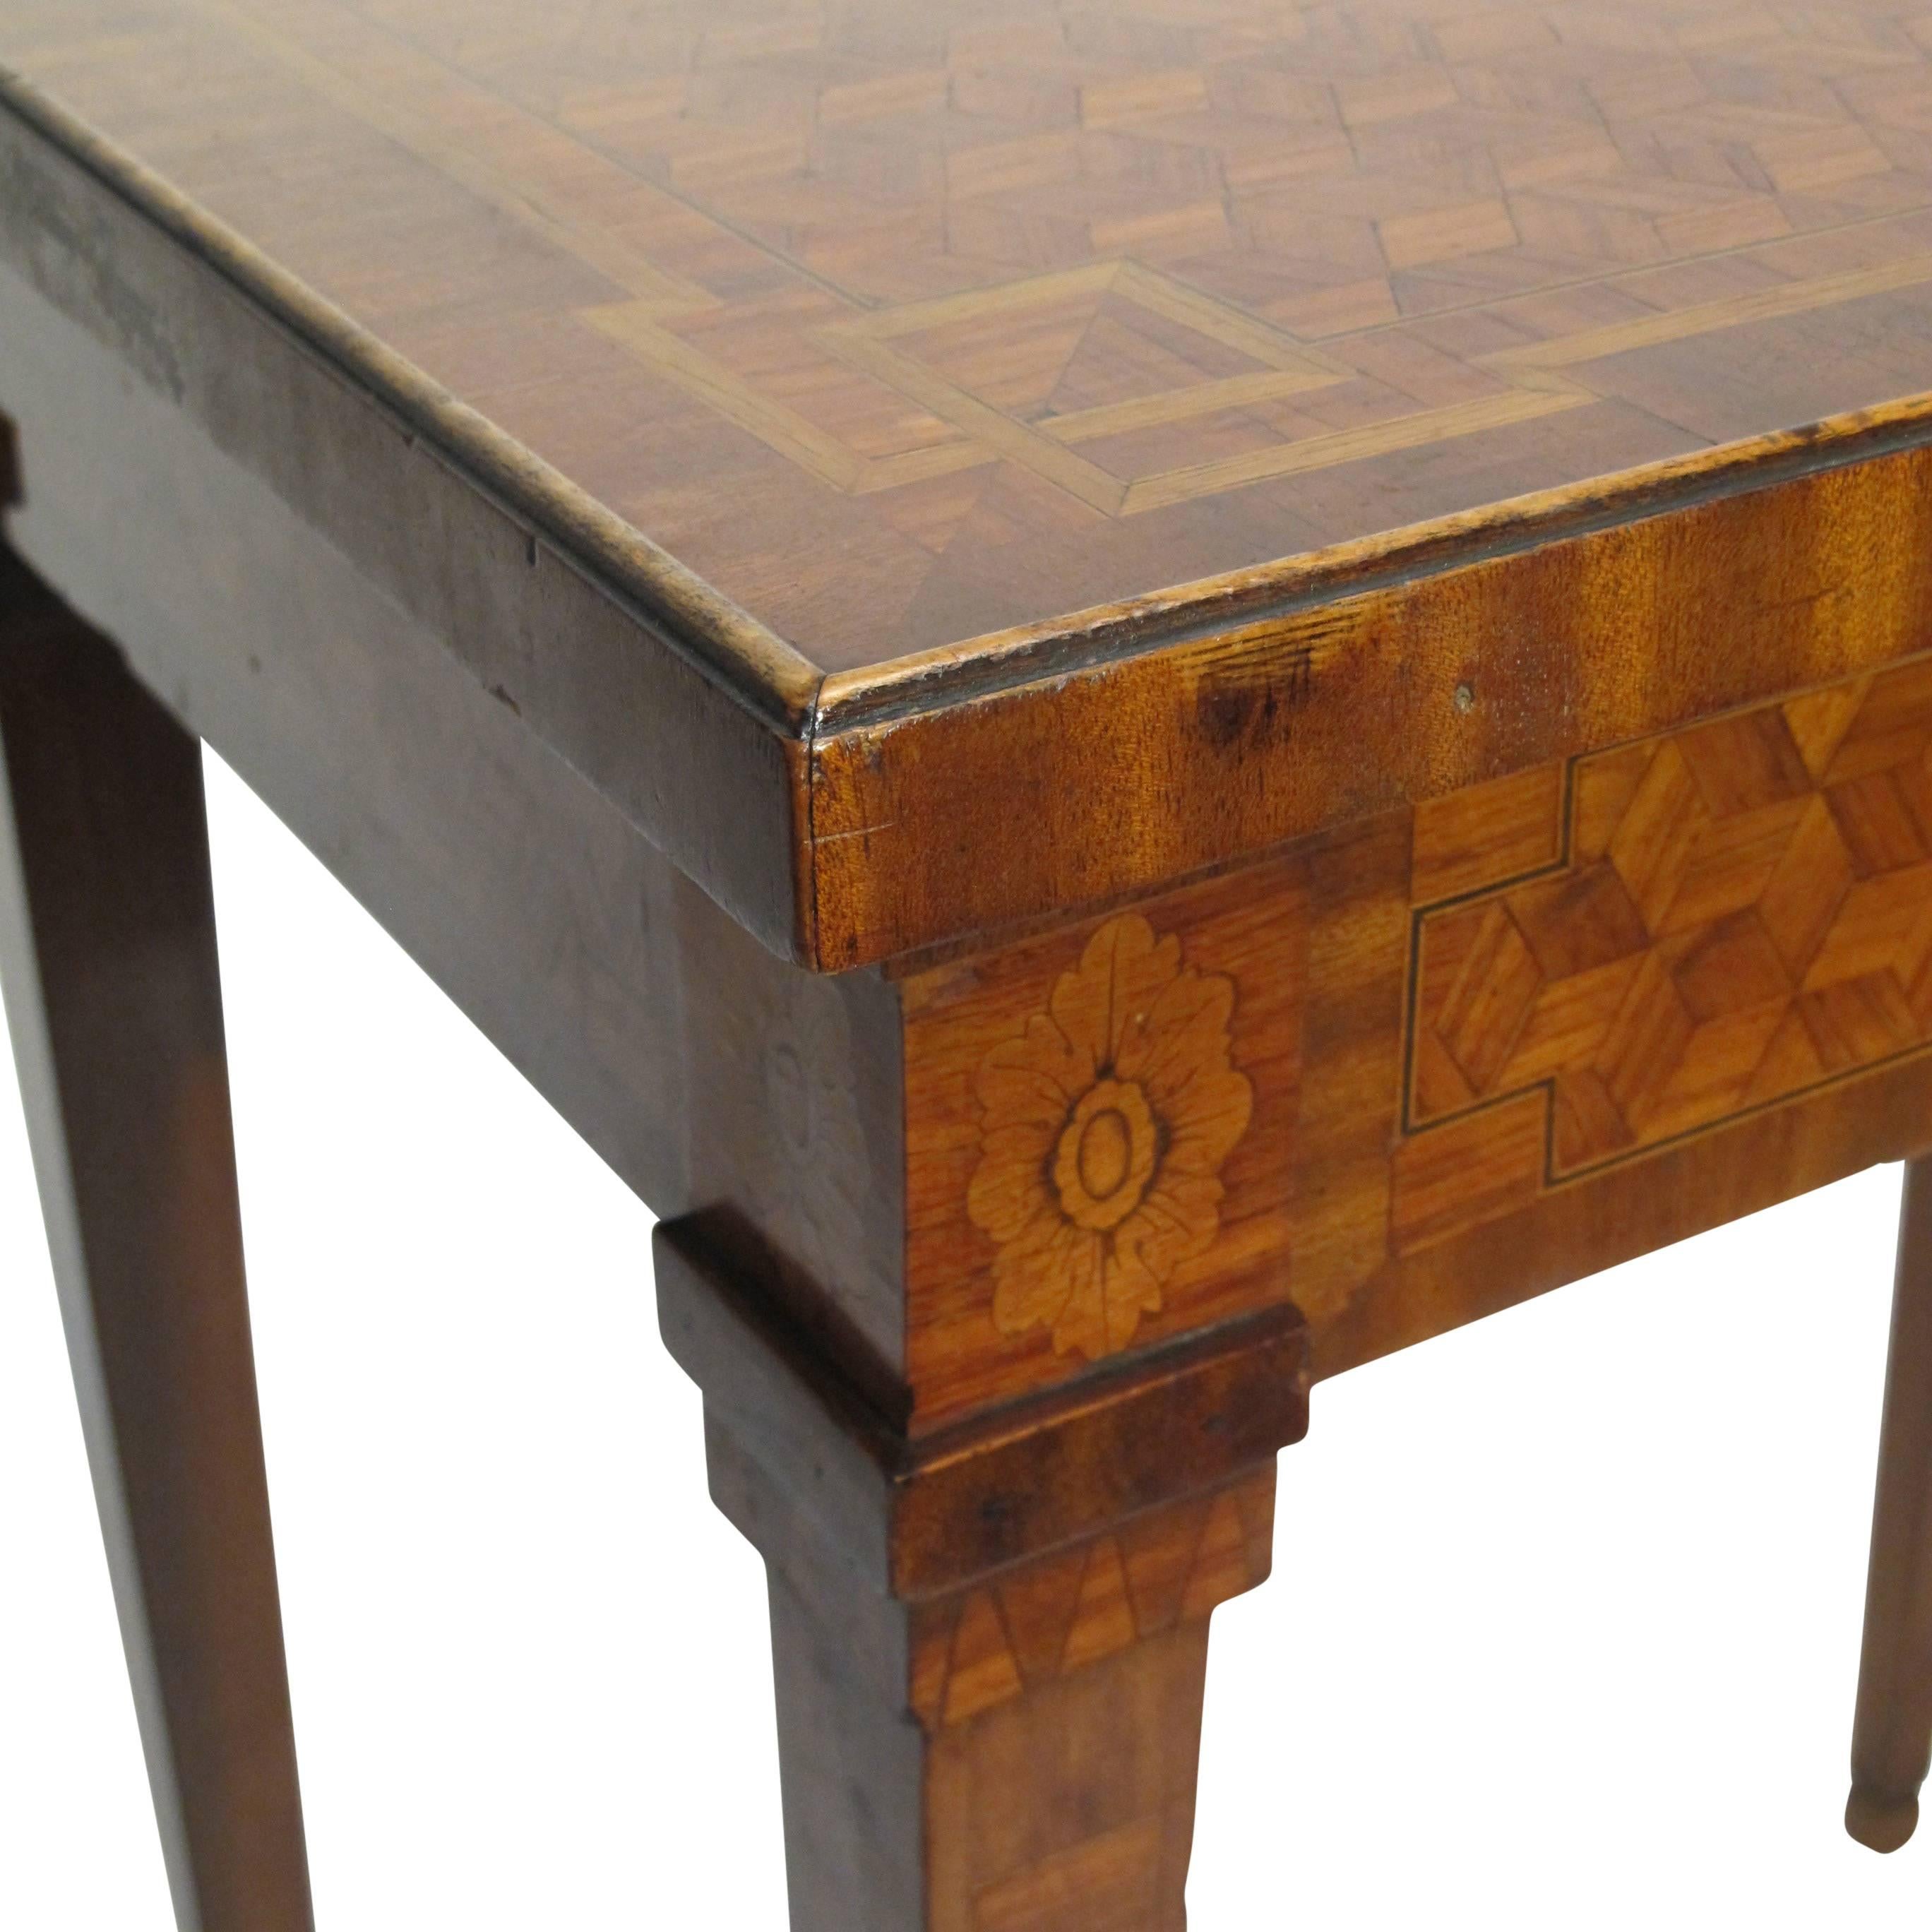 Walnut and Mixed Fruitwood Parquetry Side Table, French, 18th Century For Sale 11